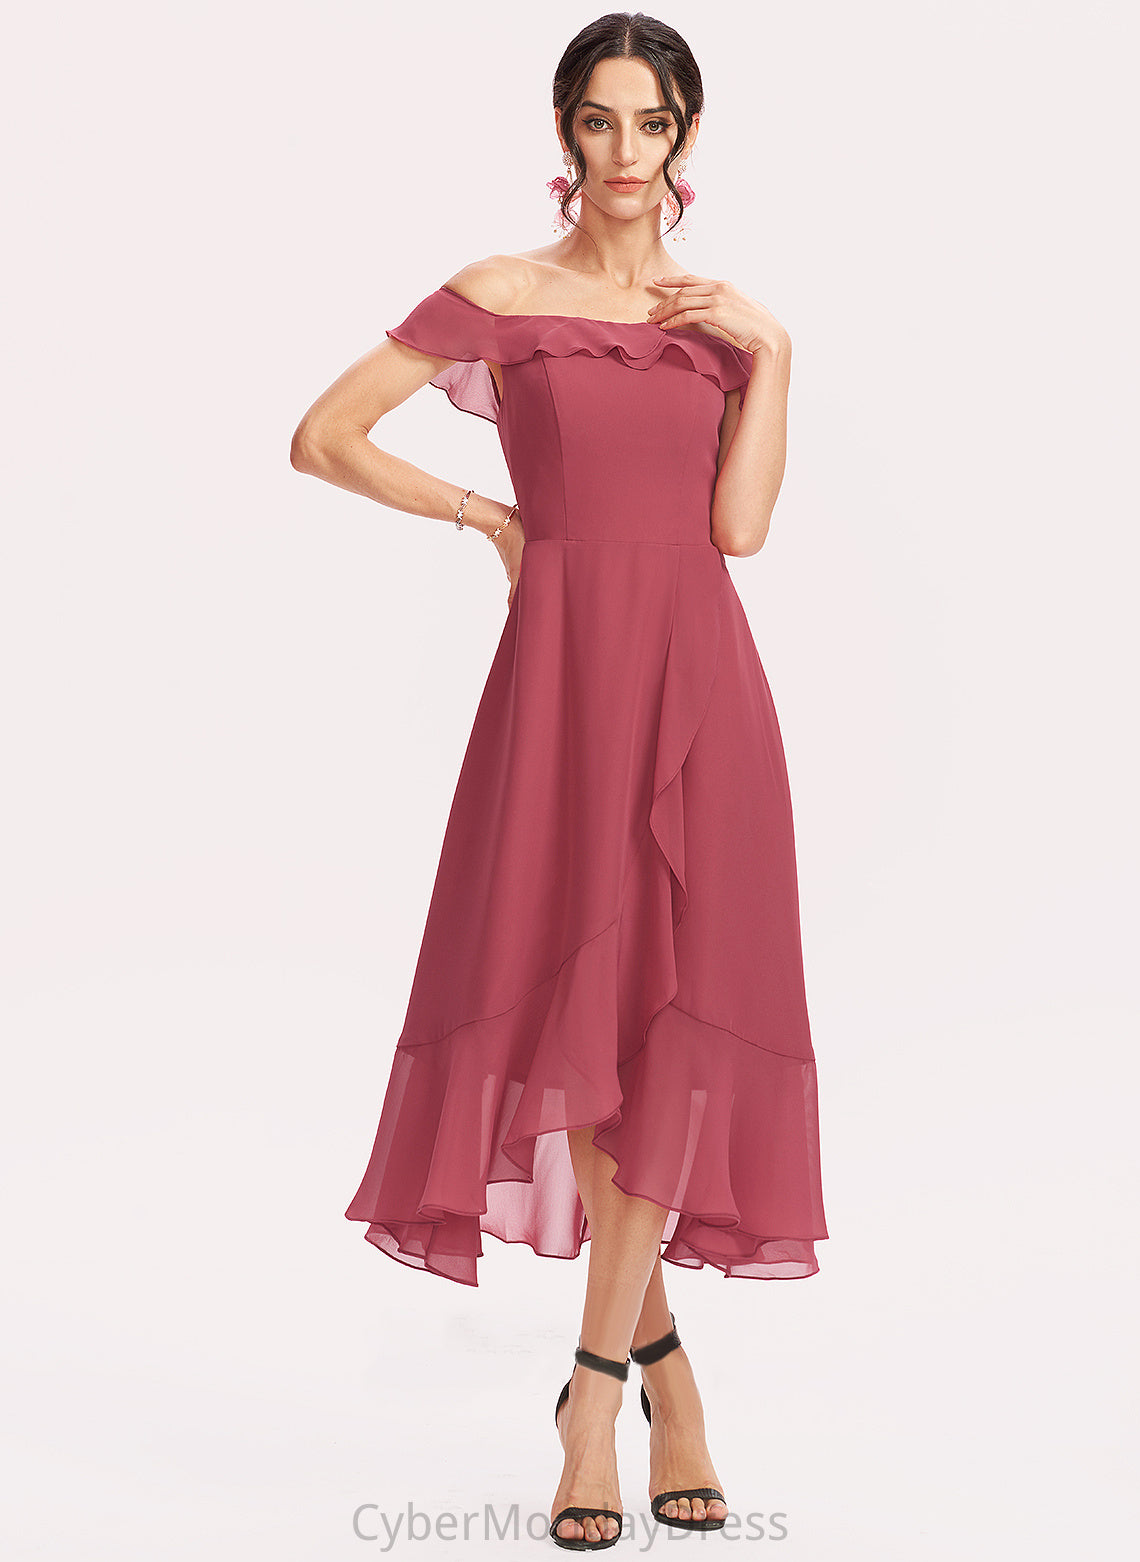 Chiffon Gia Cocktail Dresses Tea-Length Dress Cascading Ruffles A-Line Off-the-Shoulder With Cocktail